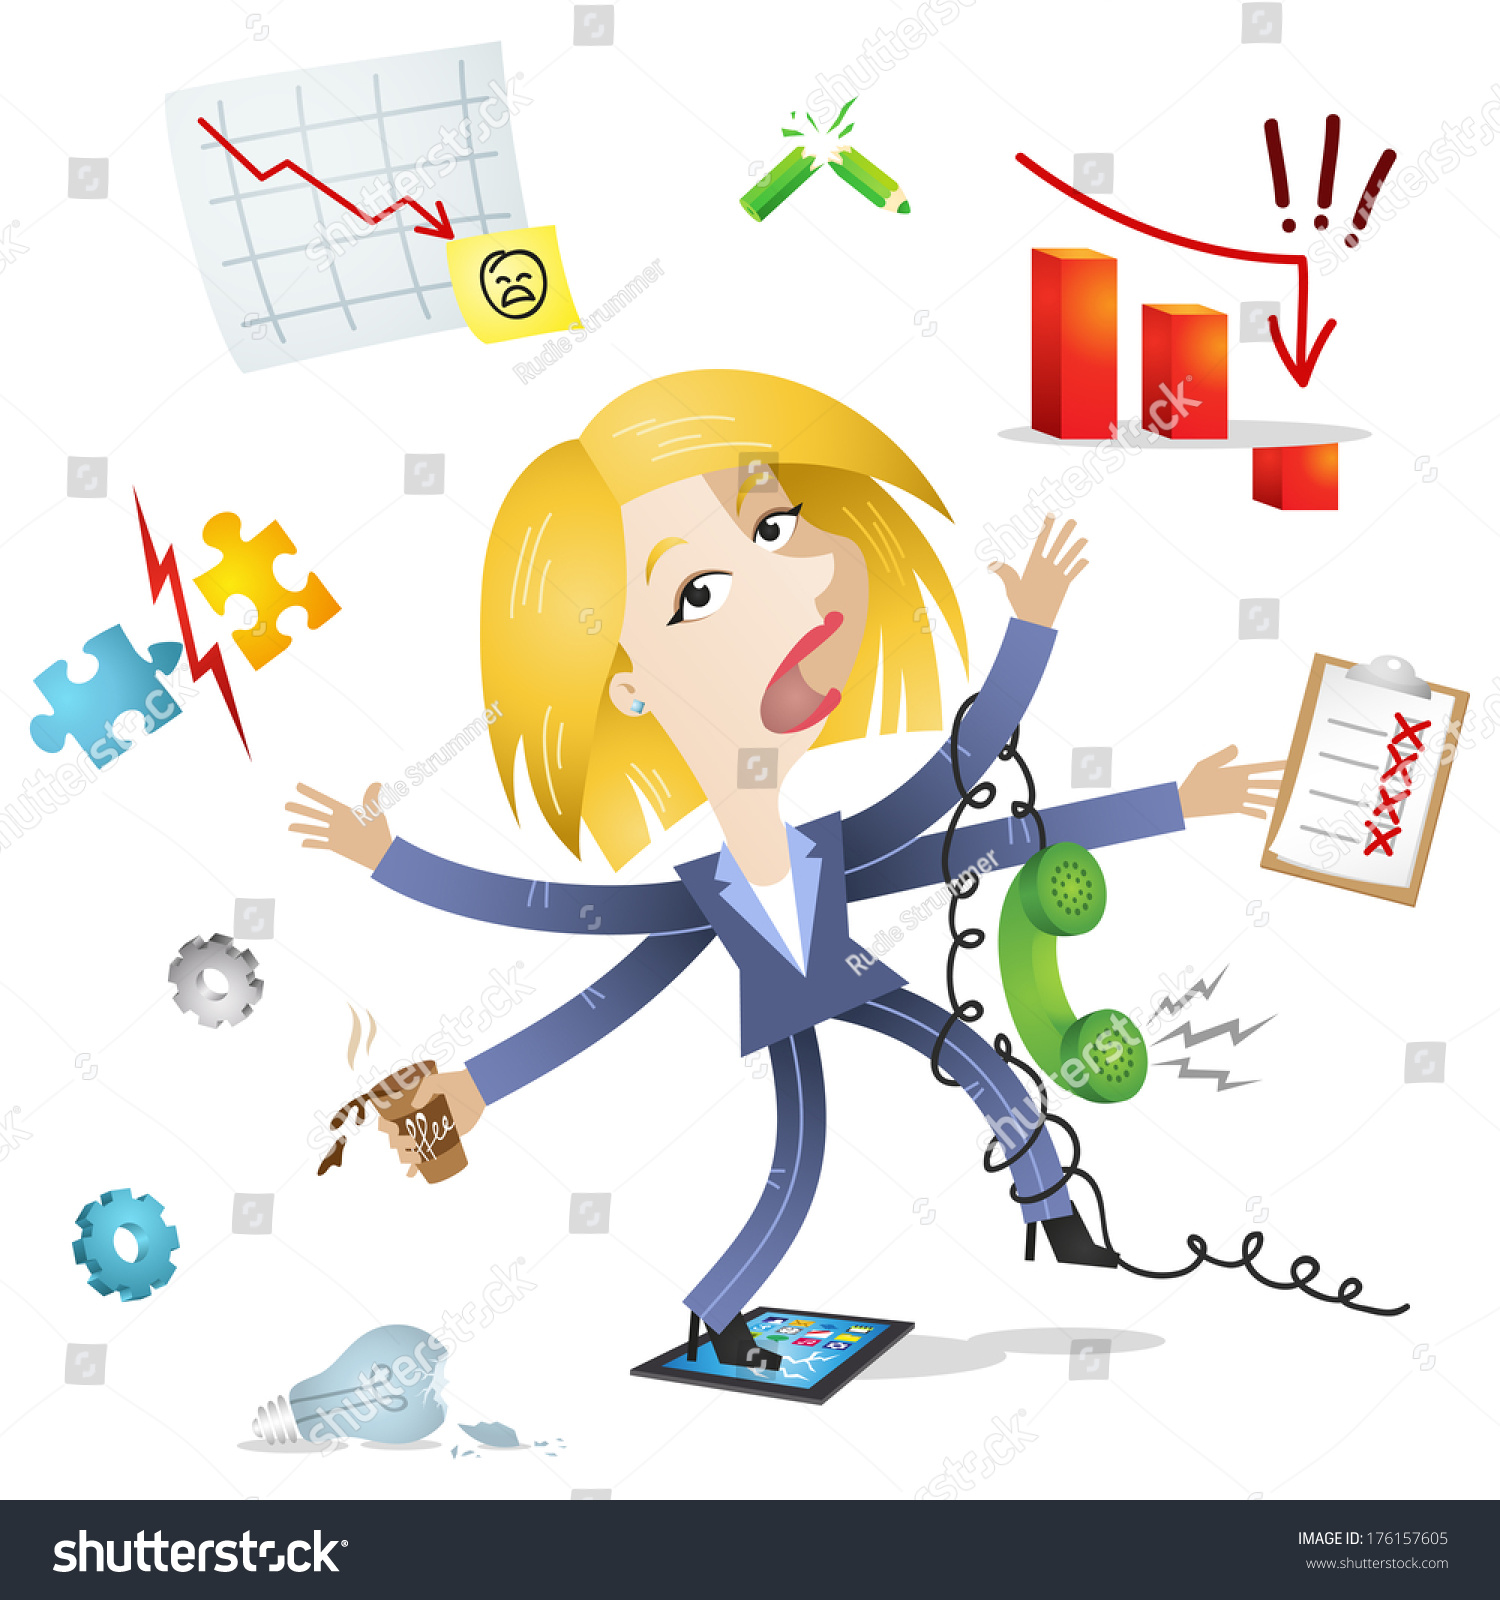 stressed employee clipart - photo #50